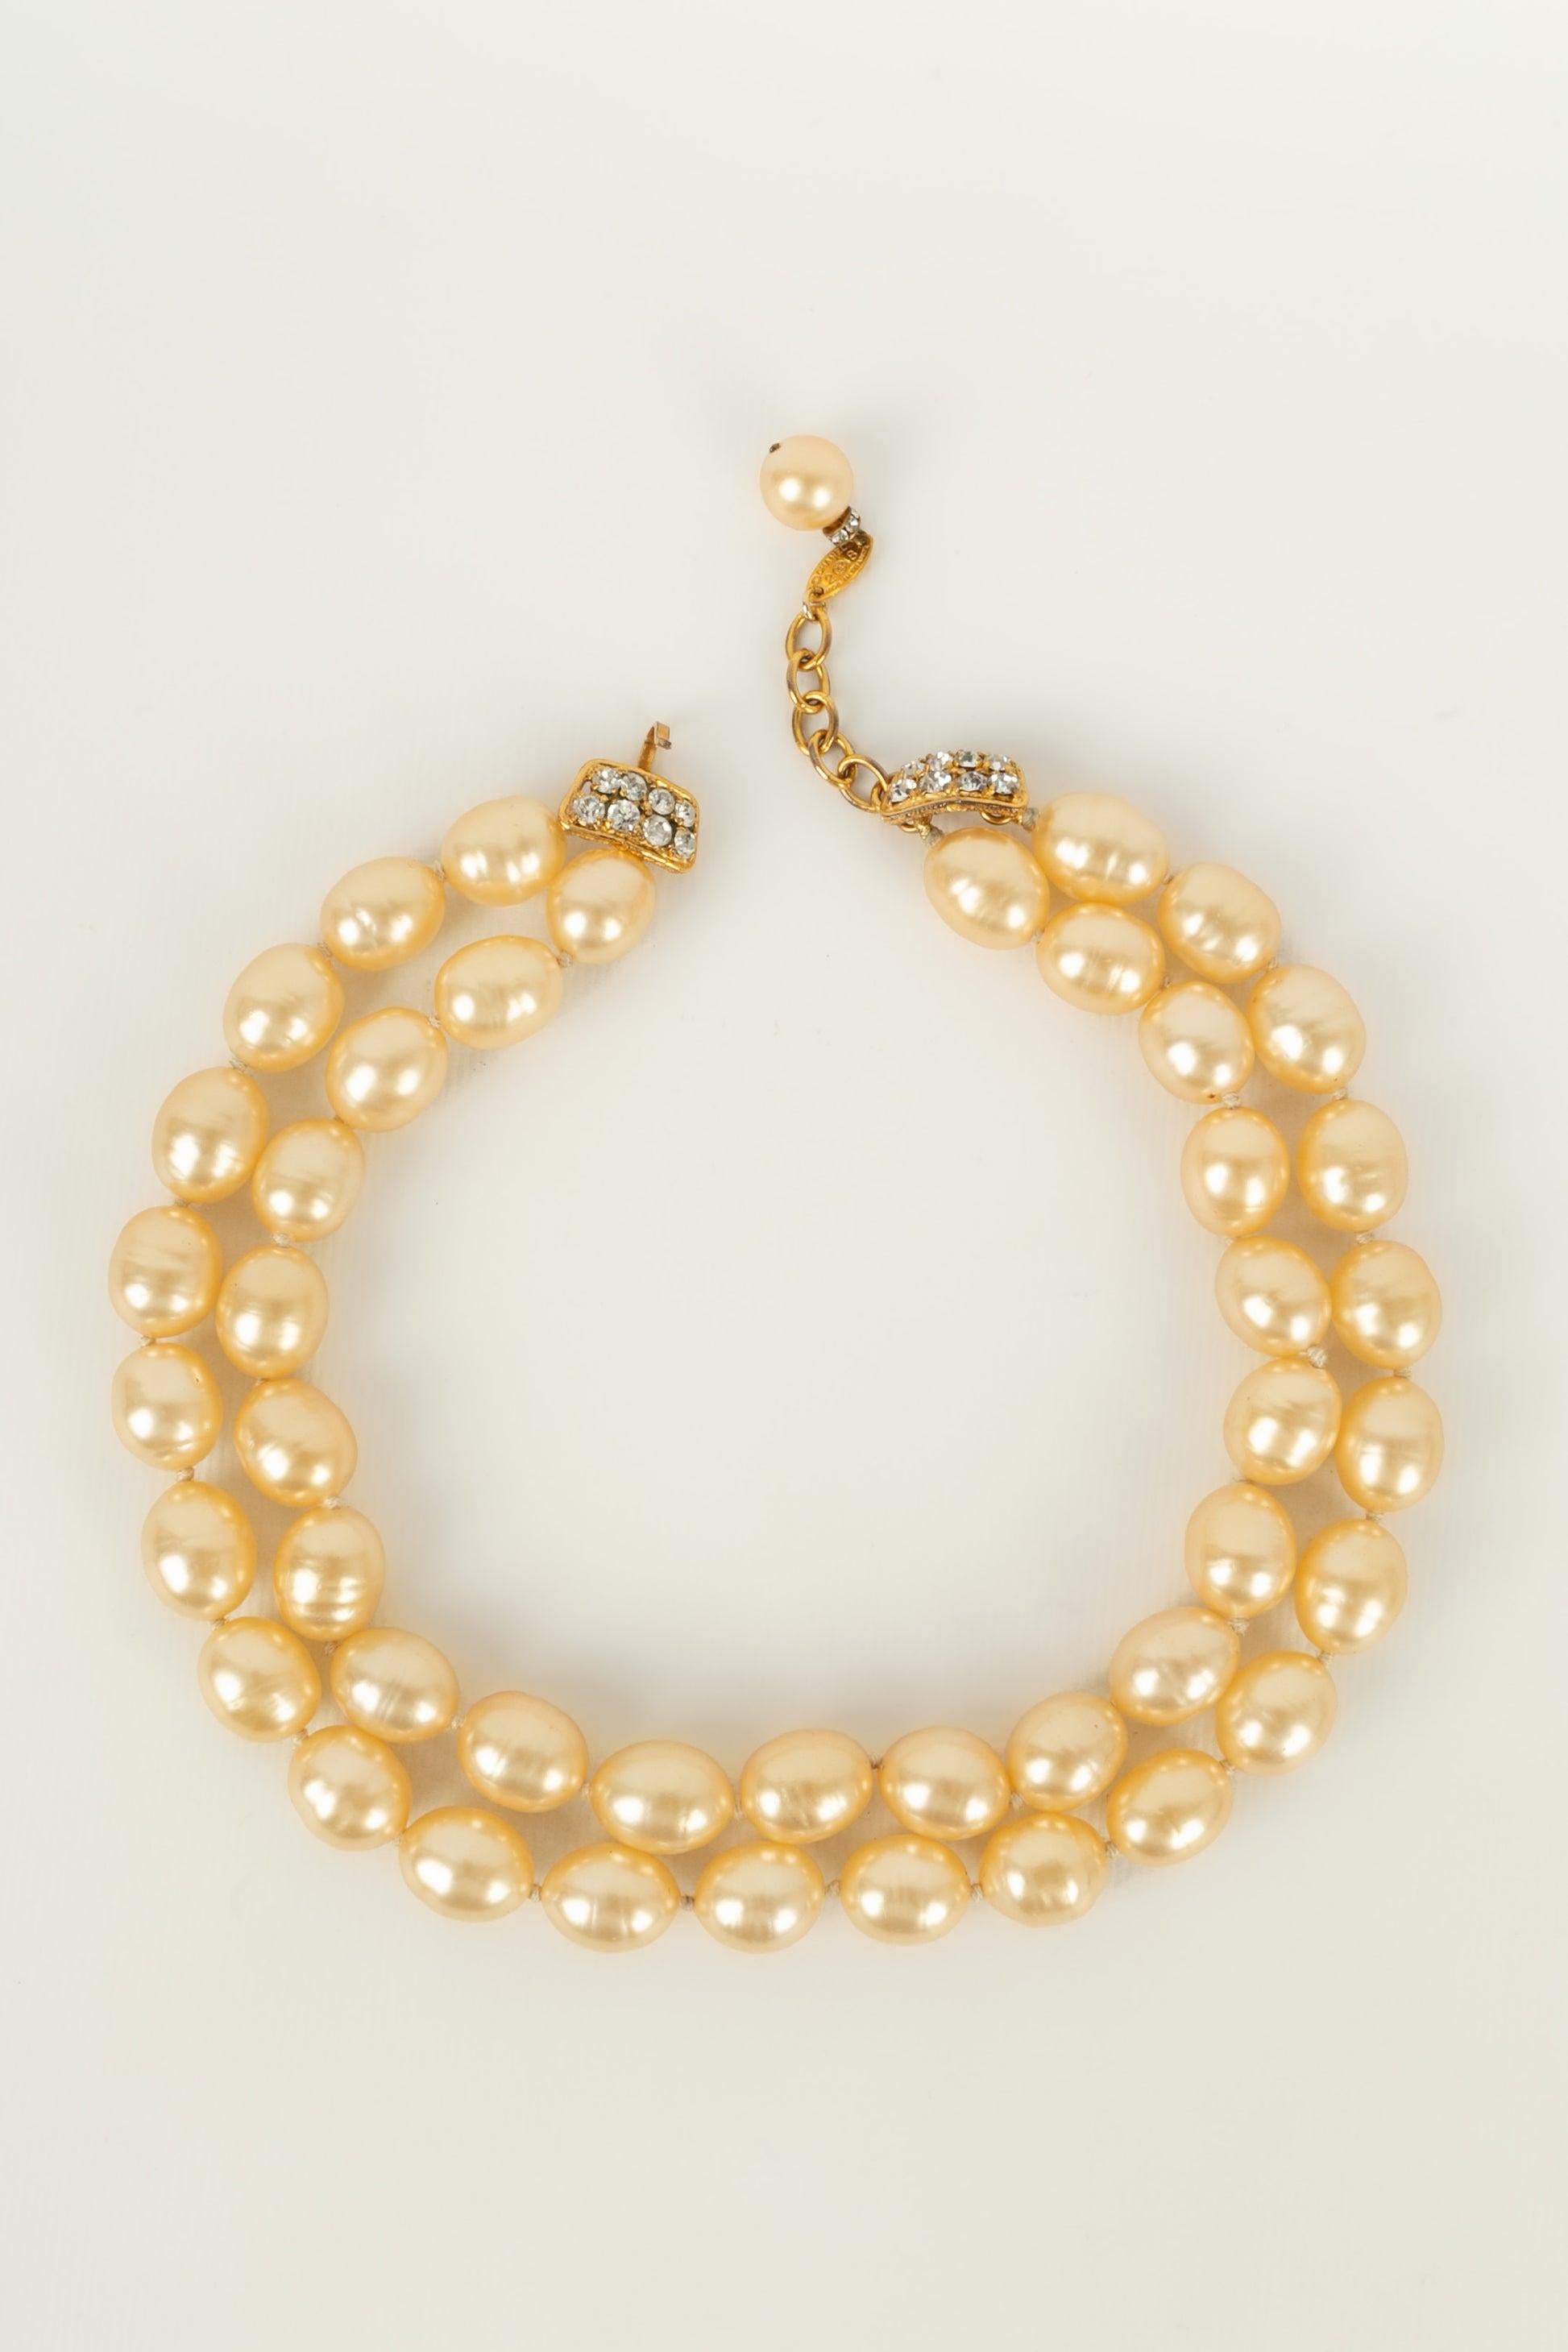 Chanel - (Made in France) Short two-row necklace with pearly beads assembled with knots and a pendant in gold-plated metal, glass paste, and rhinestones. 2CC8 Collection.

Additional information:
Condition: Very good condition
Dimensions: Length: